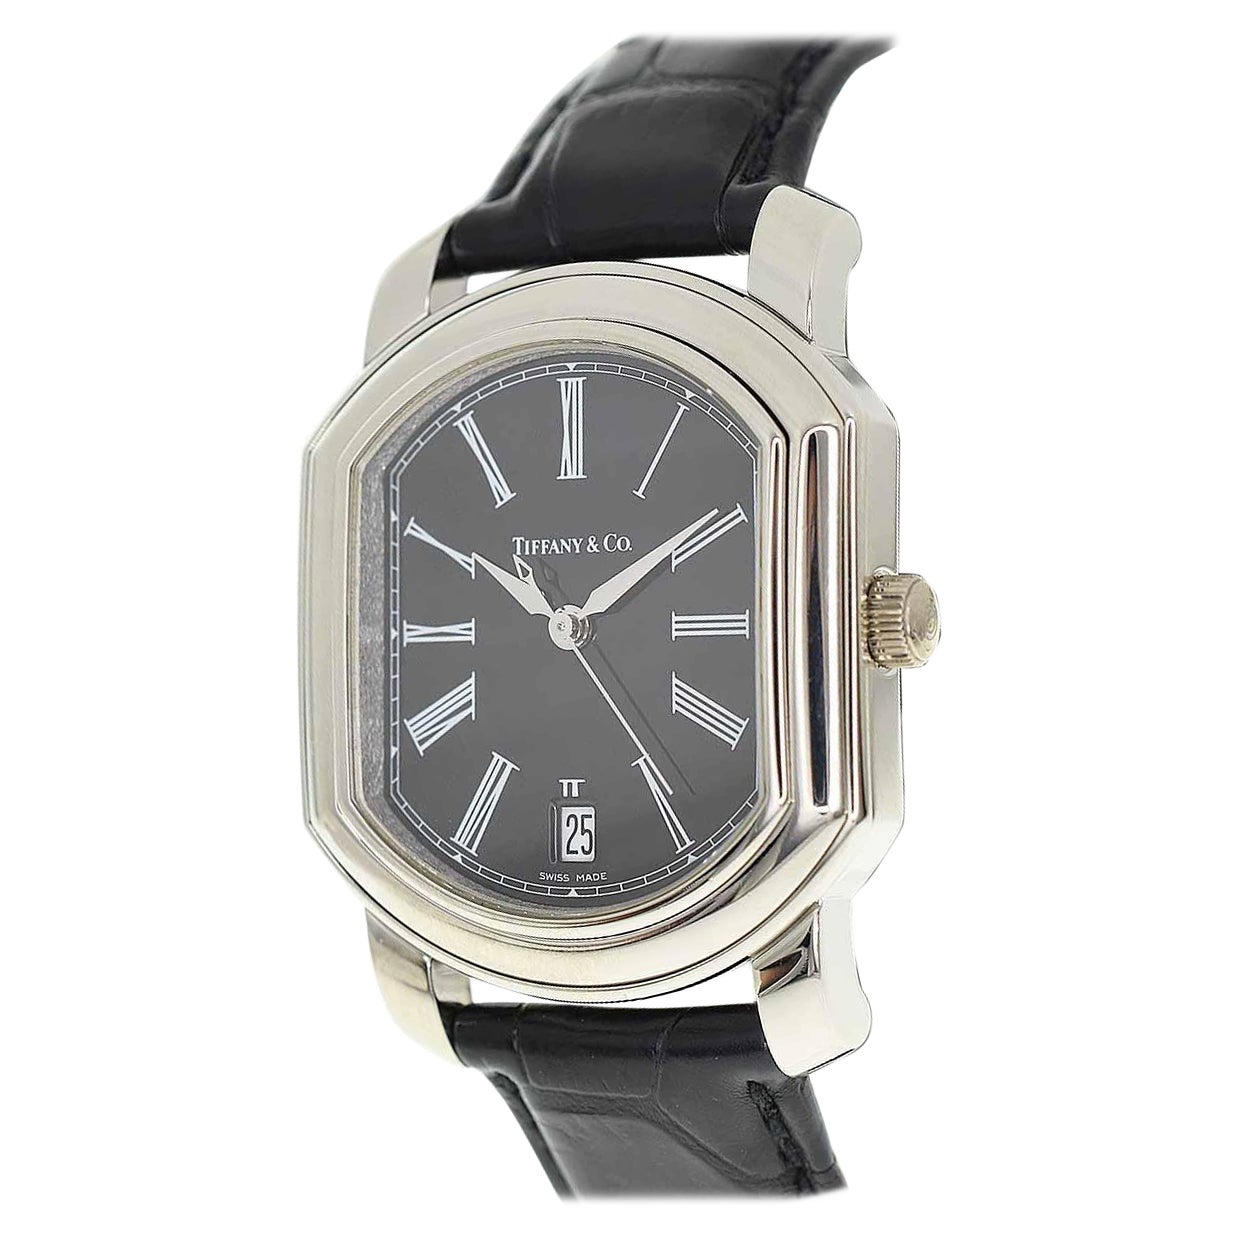 Tiffany&Co. Platinum Black Leather Strap Mark Coupe Watch Automatic Date Display